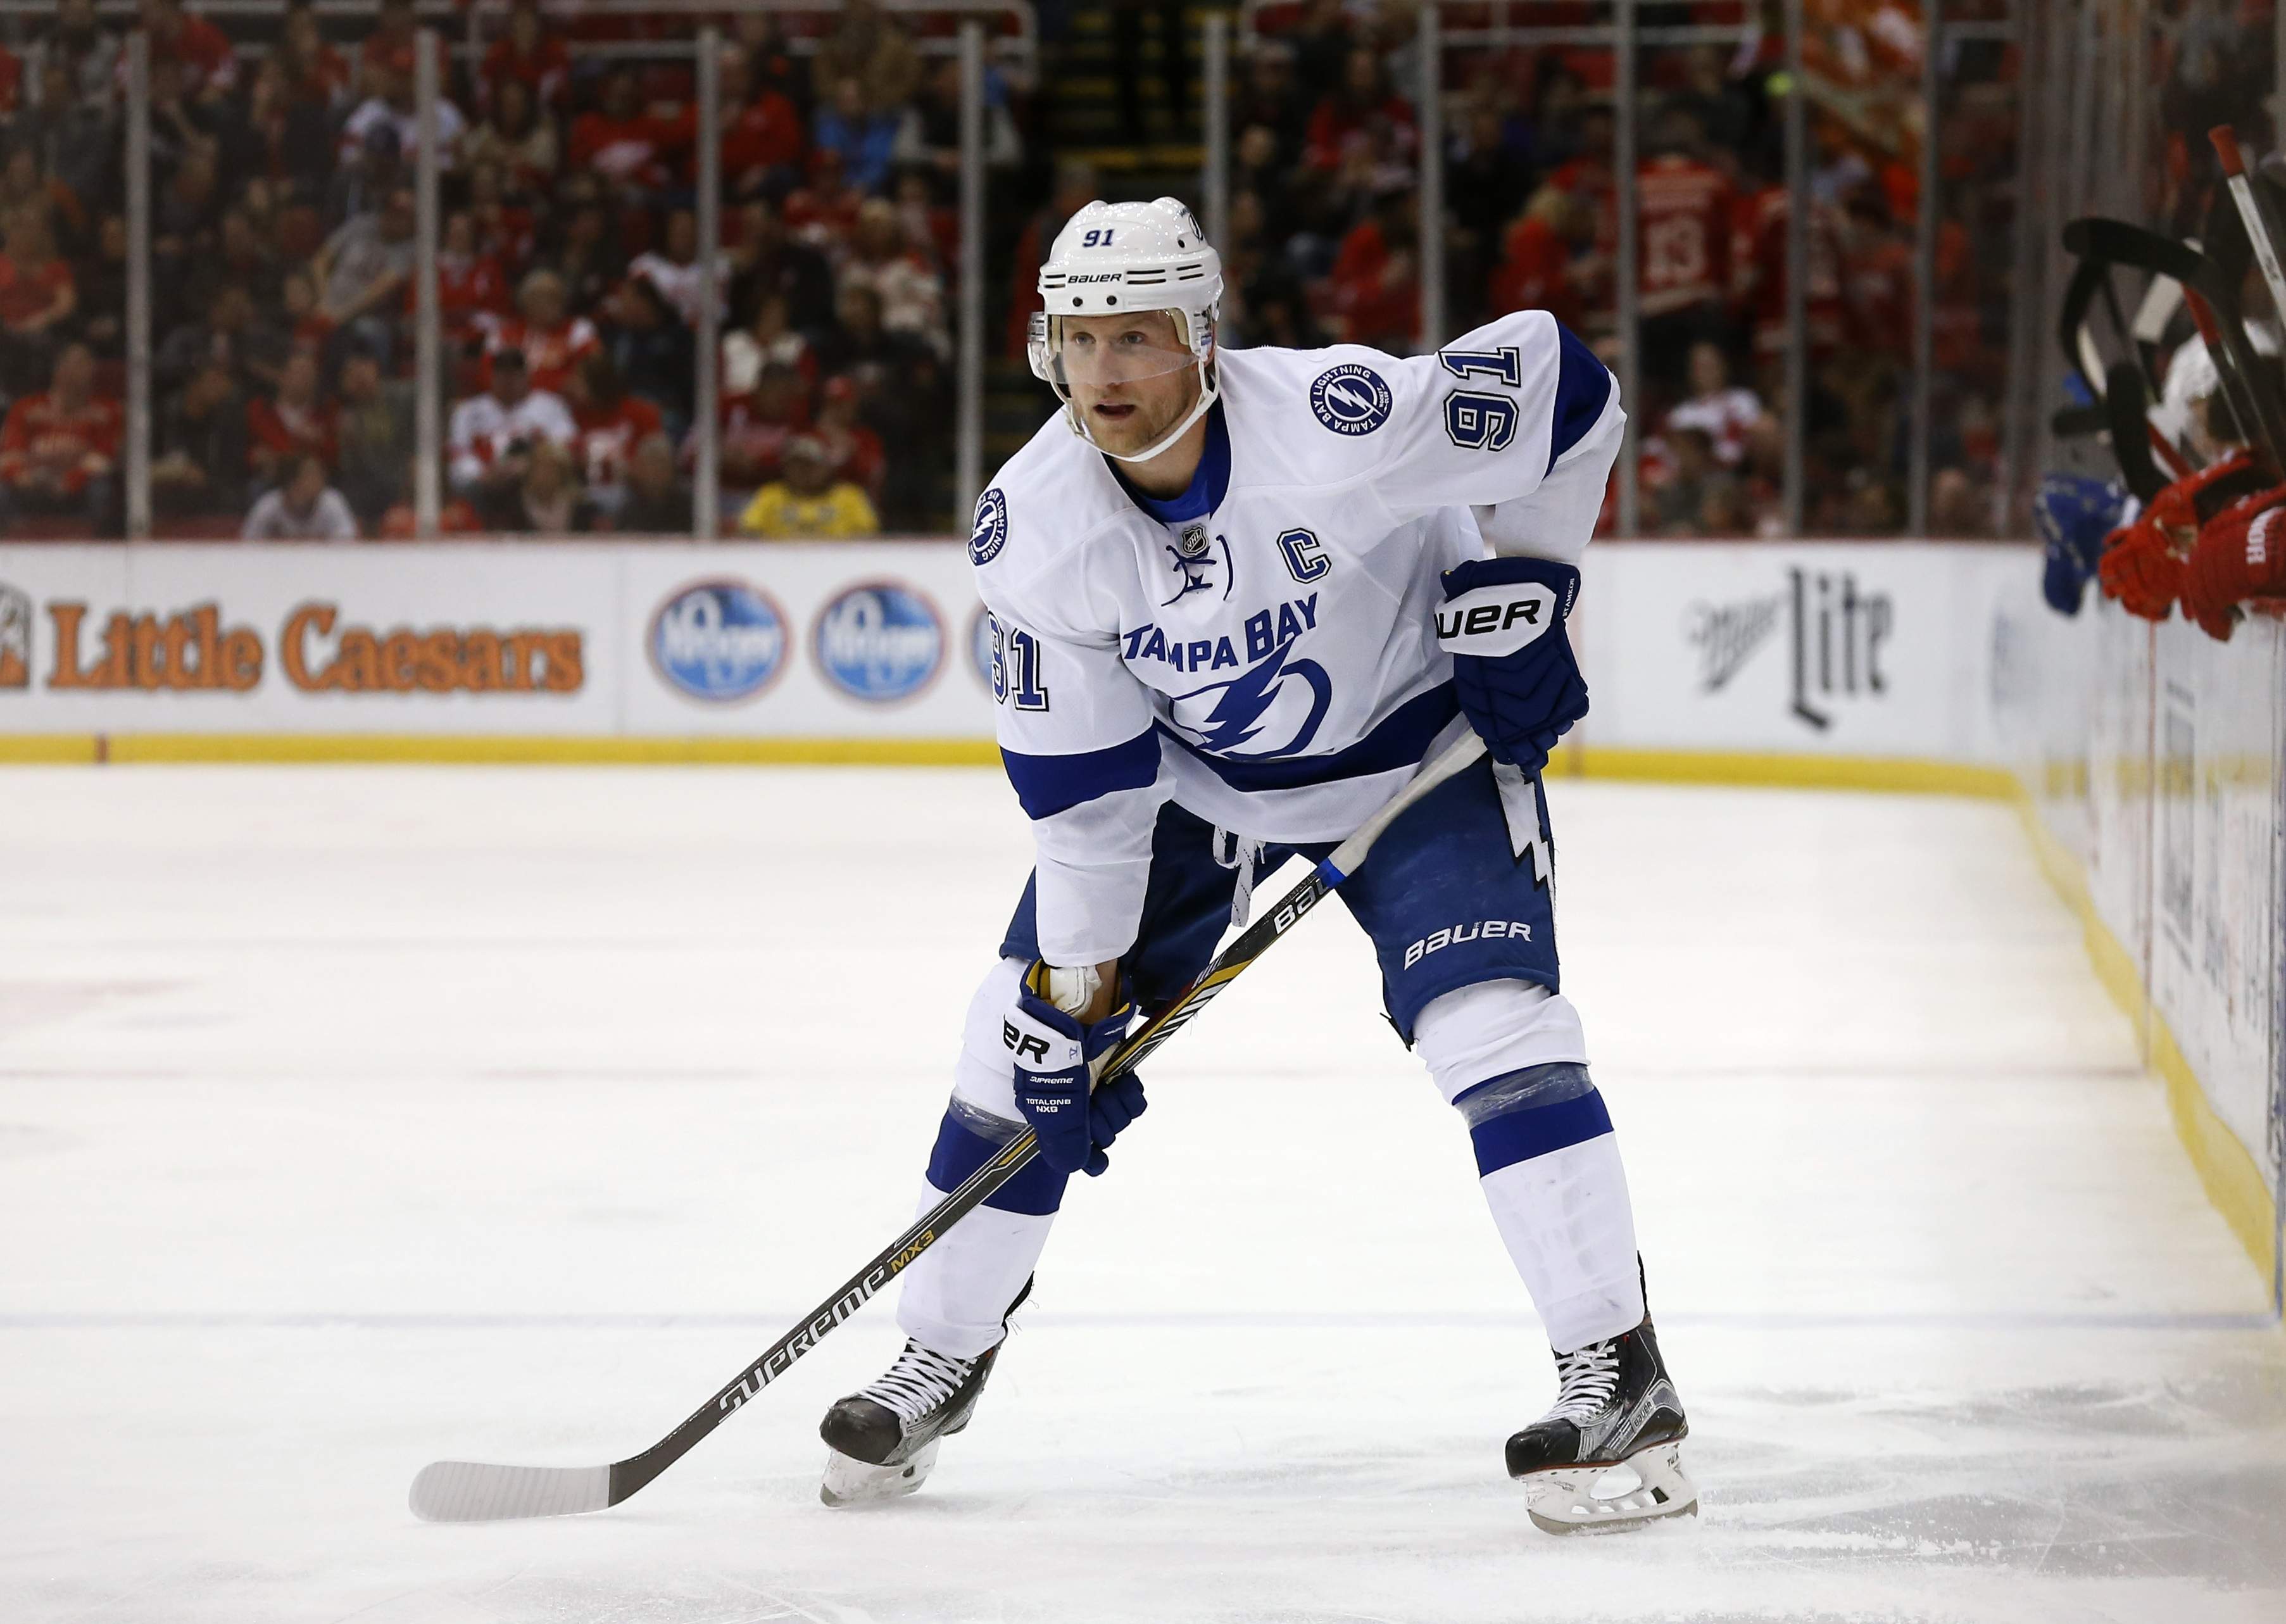 Steven Stamkos Wallpaper High Resolution And Quality